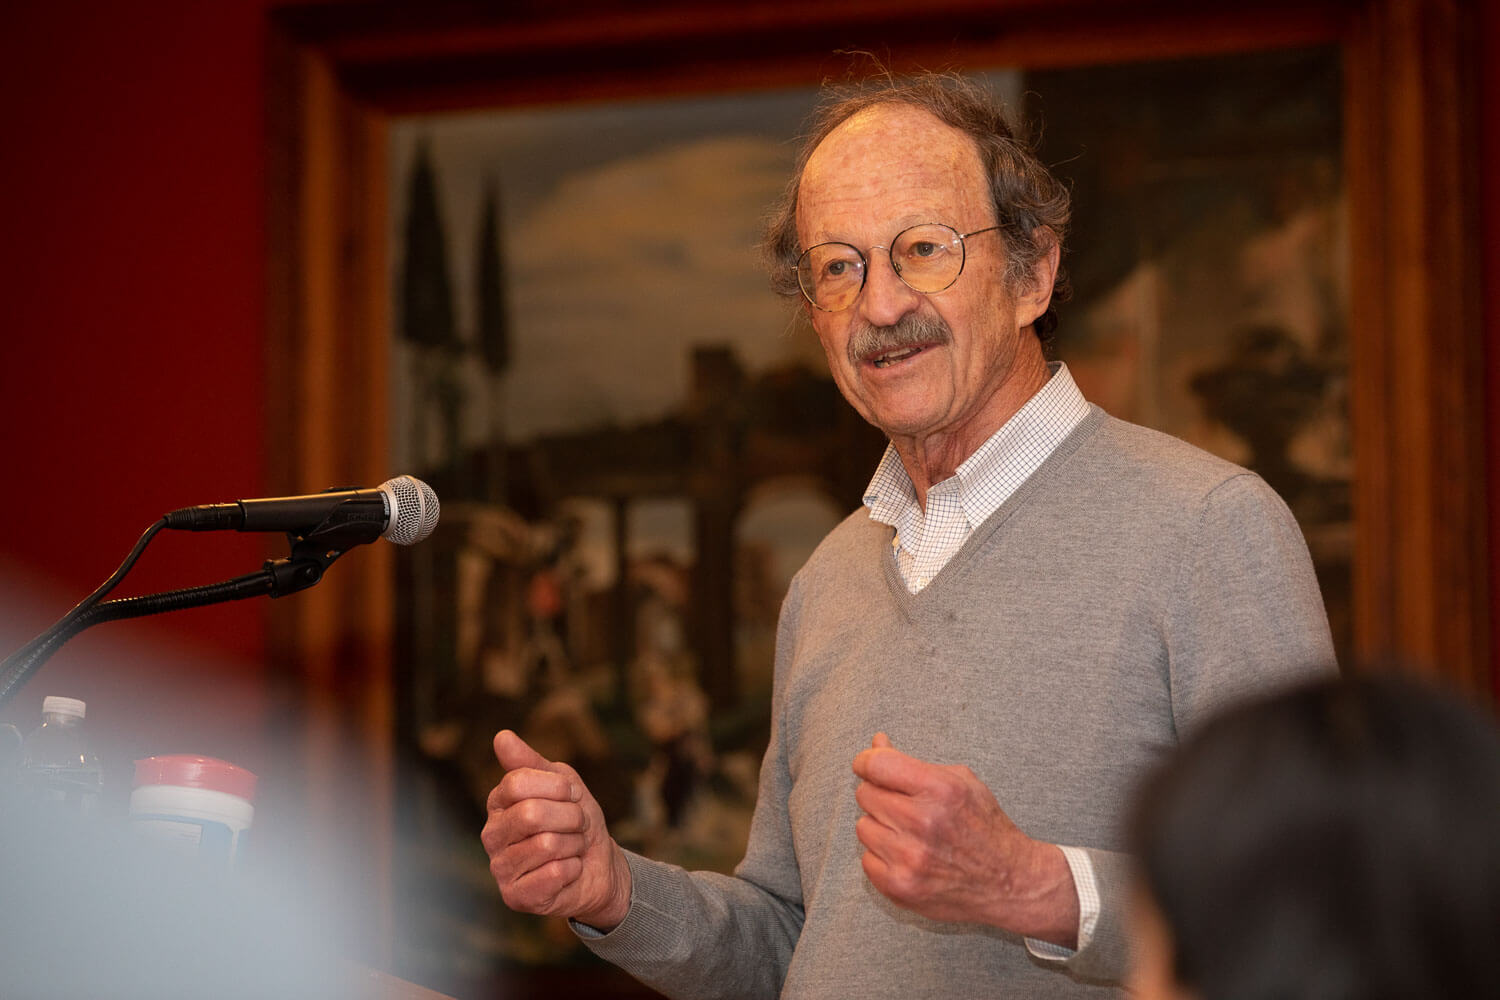 Dr. Harold Varmus, 1989 Nobel prize winner in Medicine, speaks at the first Annual Distinguished B.A.-M.D. Lecture hosted by the Coordinated BA/MD program at Brooklyn College held in March.